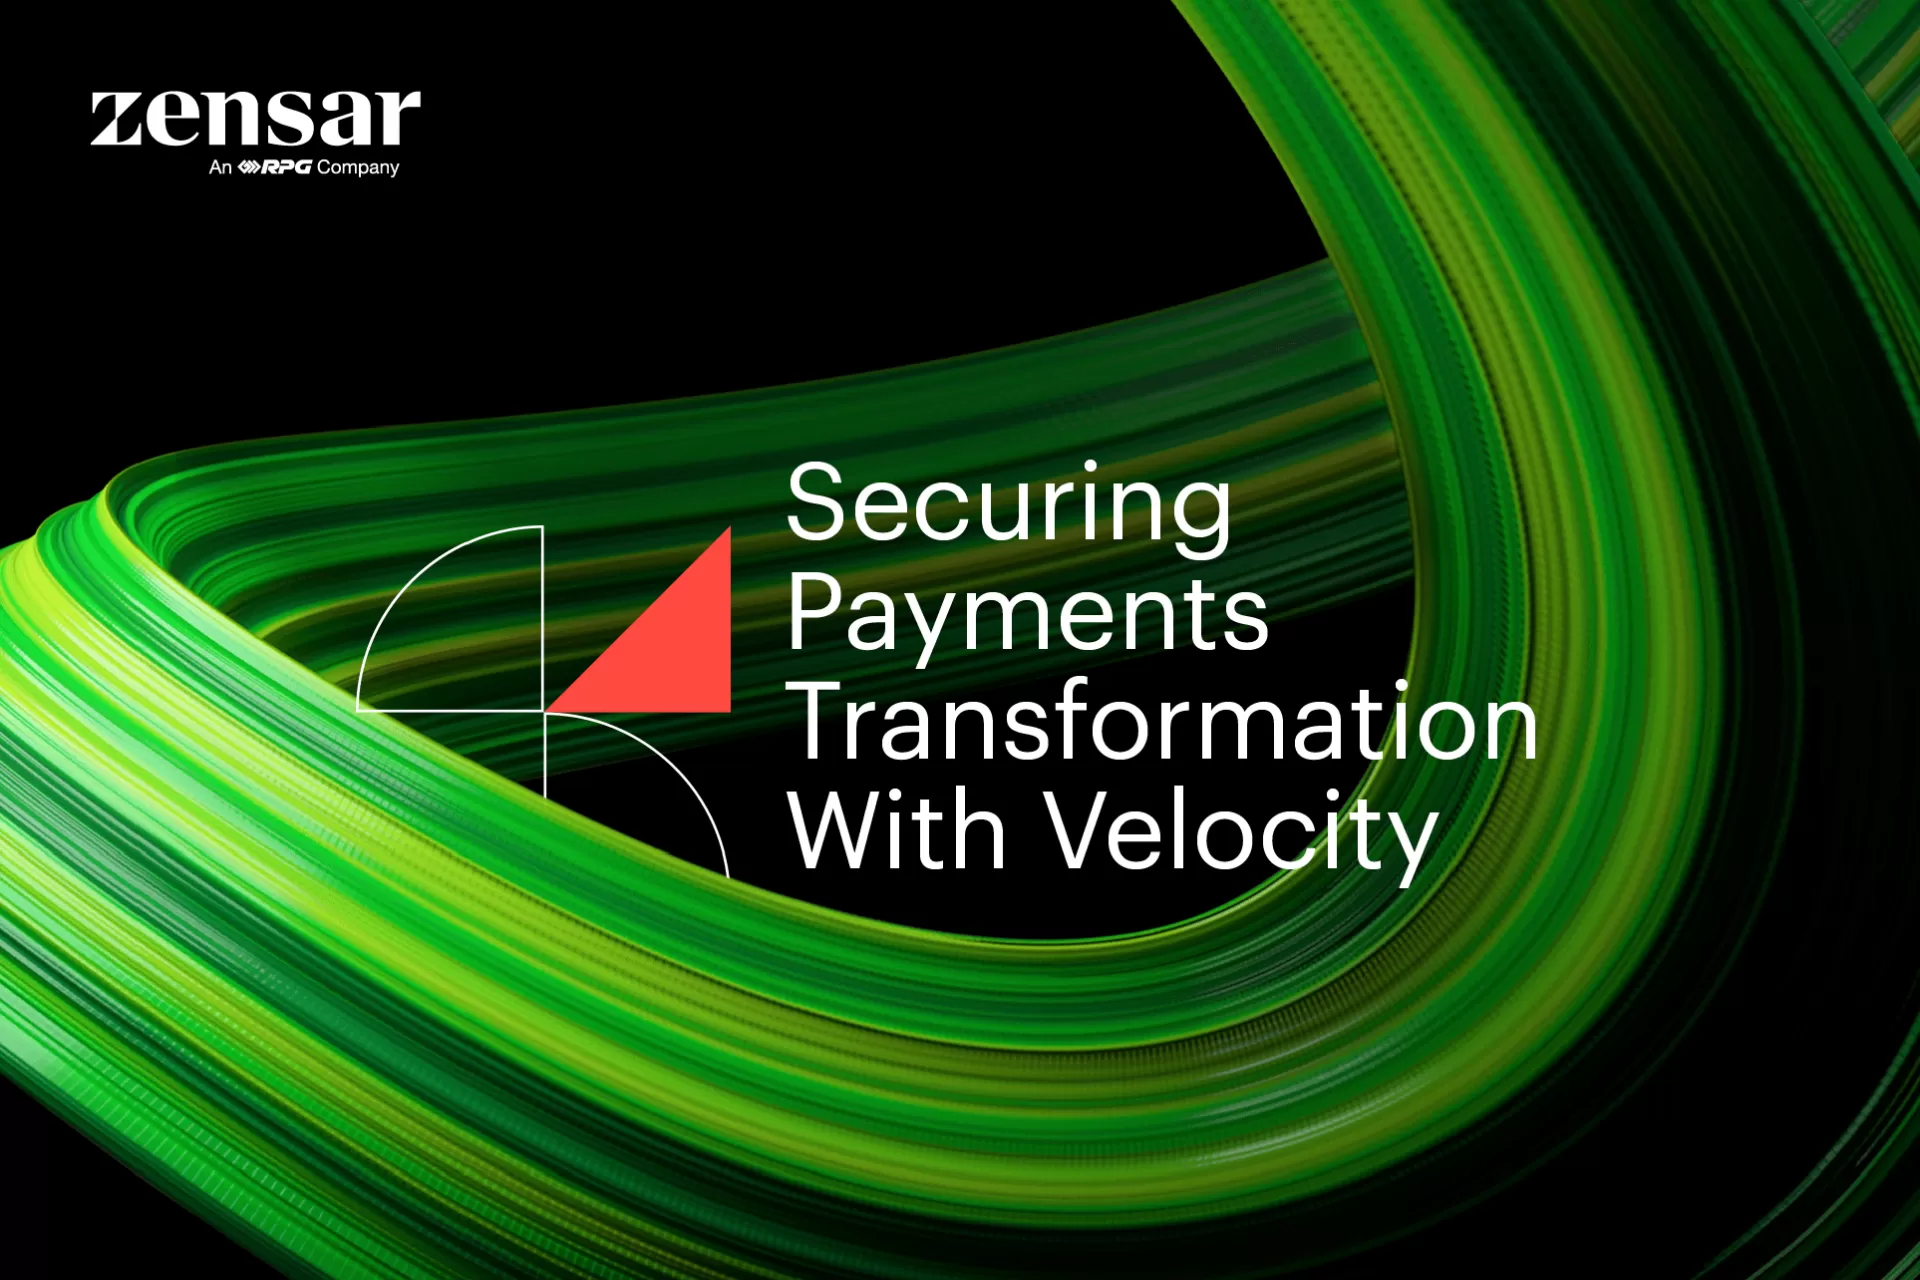 Securing Payments Transformation with Velocity